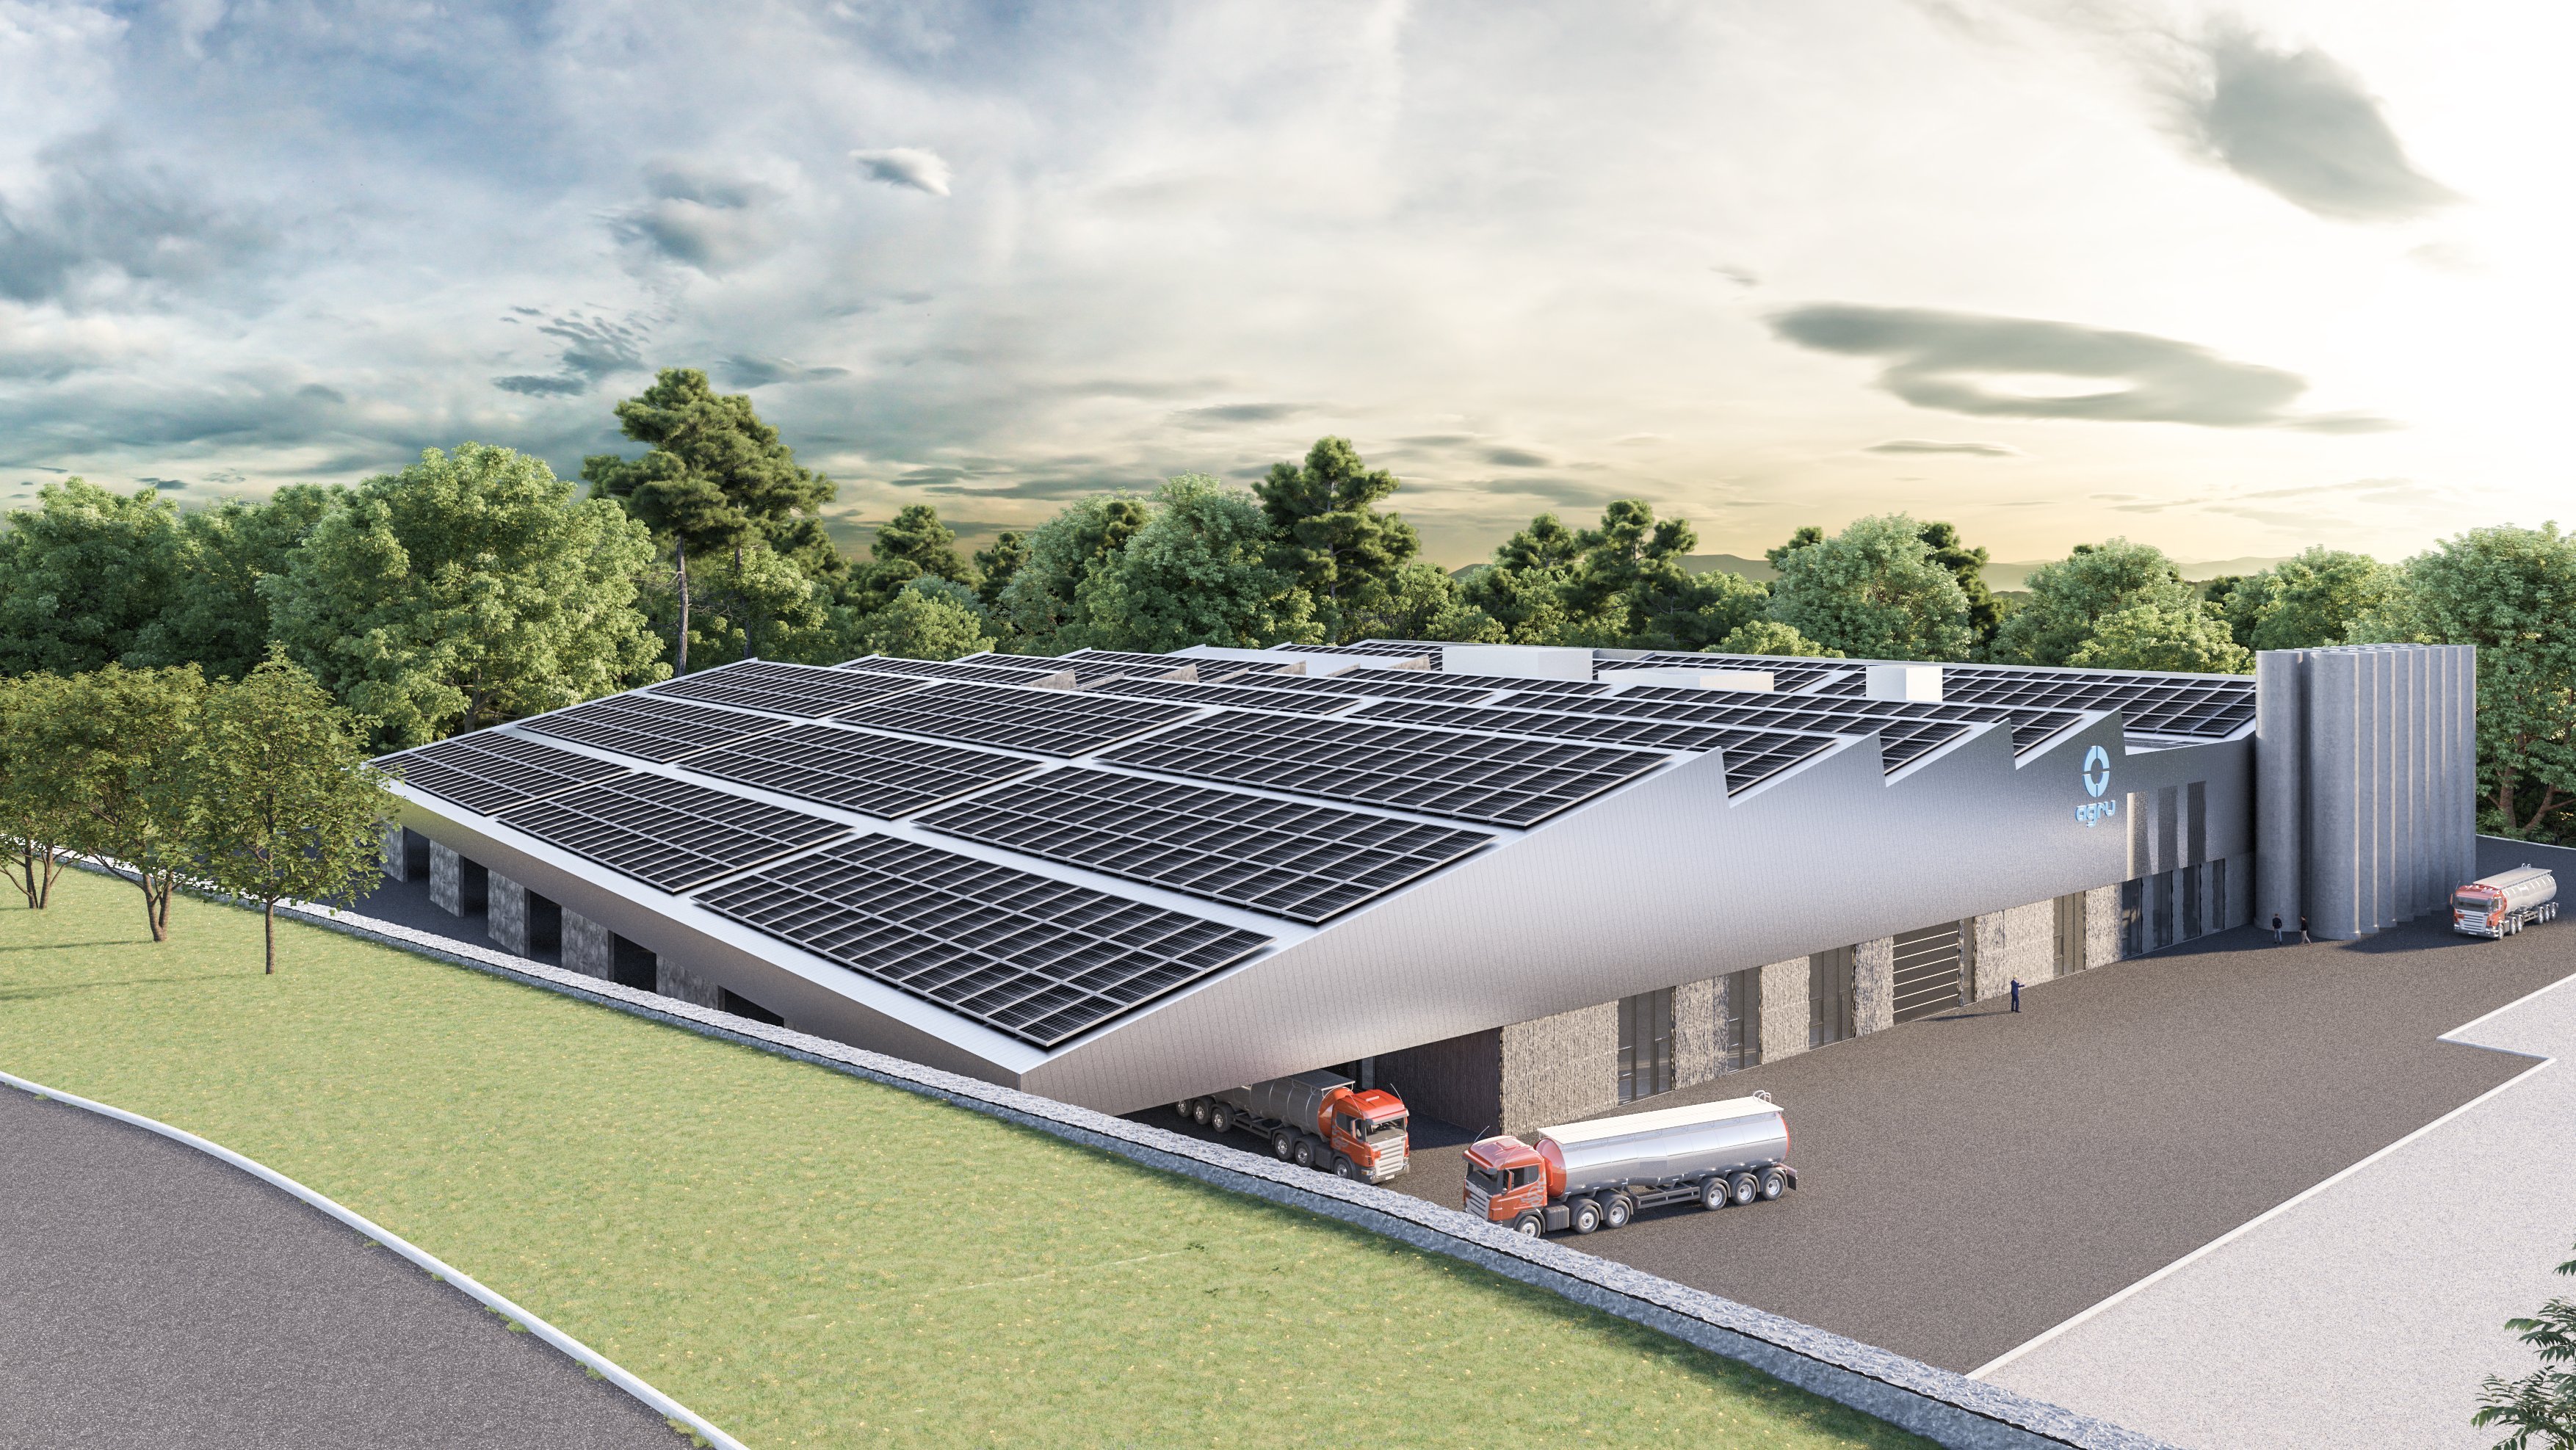 Solar panels ensure sustainability. The opening is planned for early 2023.  Photo Credit: Visualisation: xarchitekten | rendering: sojin seung